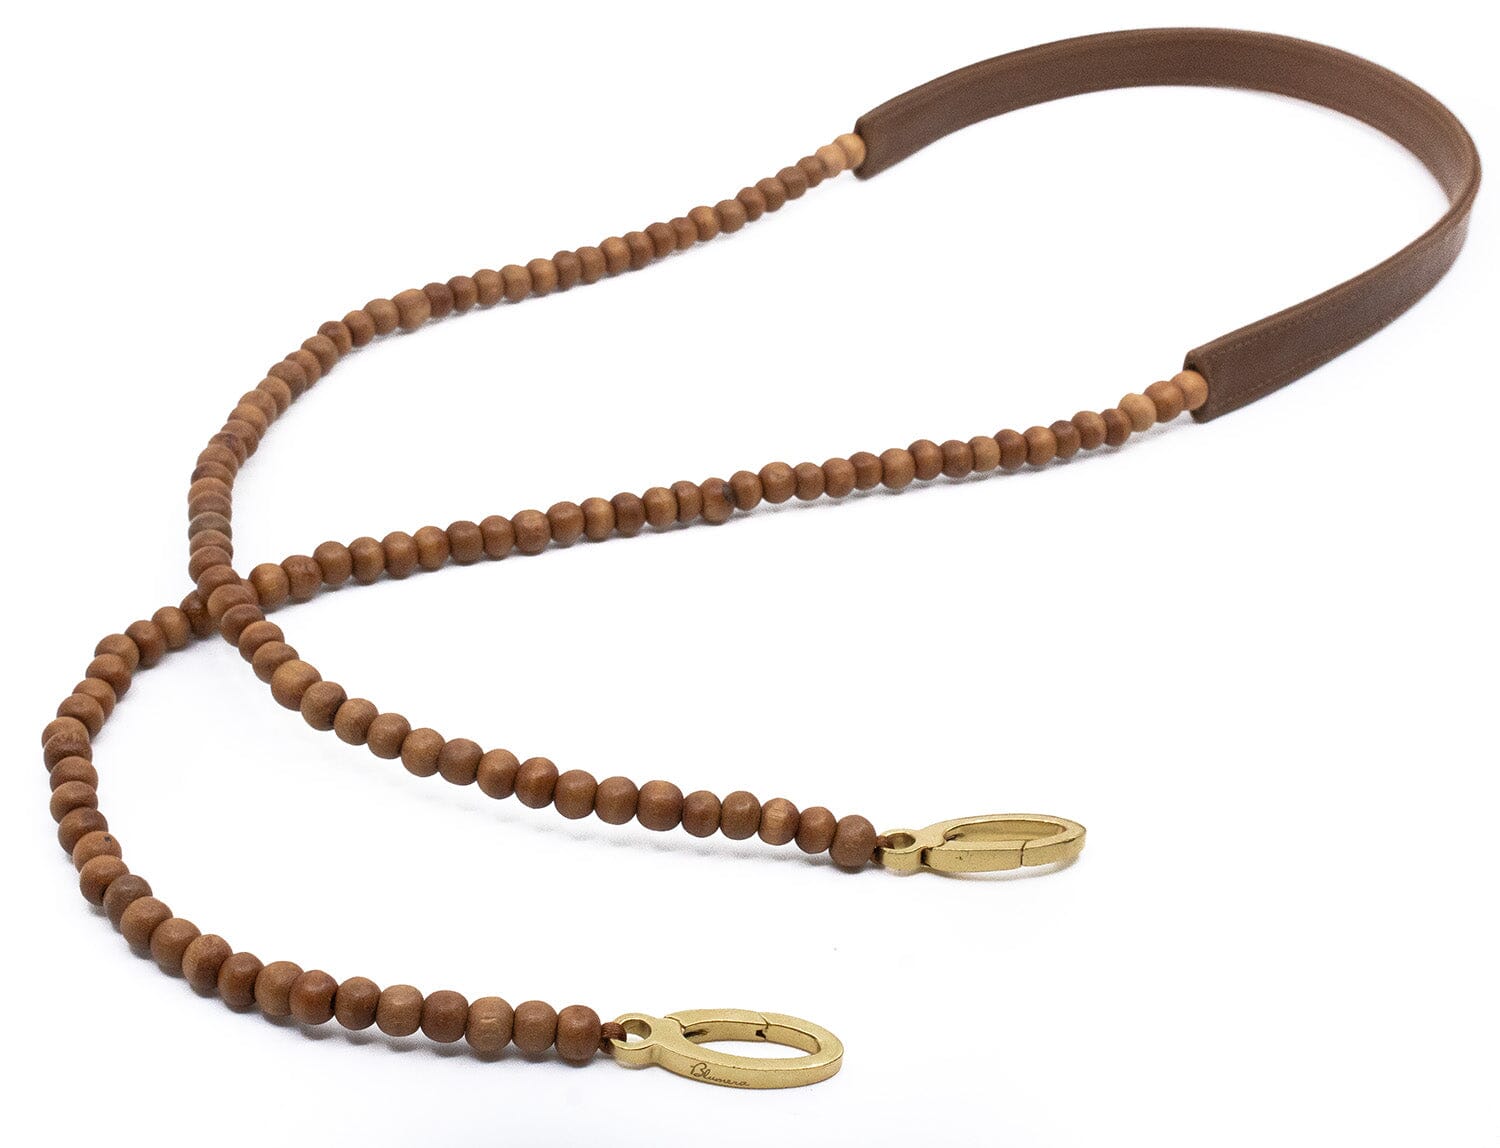 Hand-Crafted Wood Beaded and Leather Shoulder Strap Blumera 